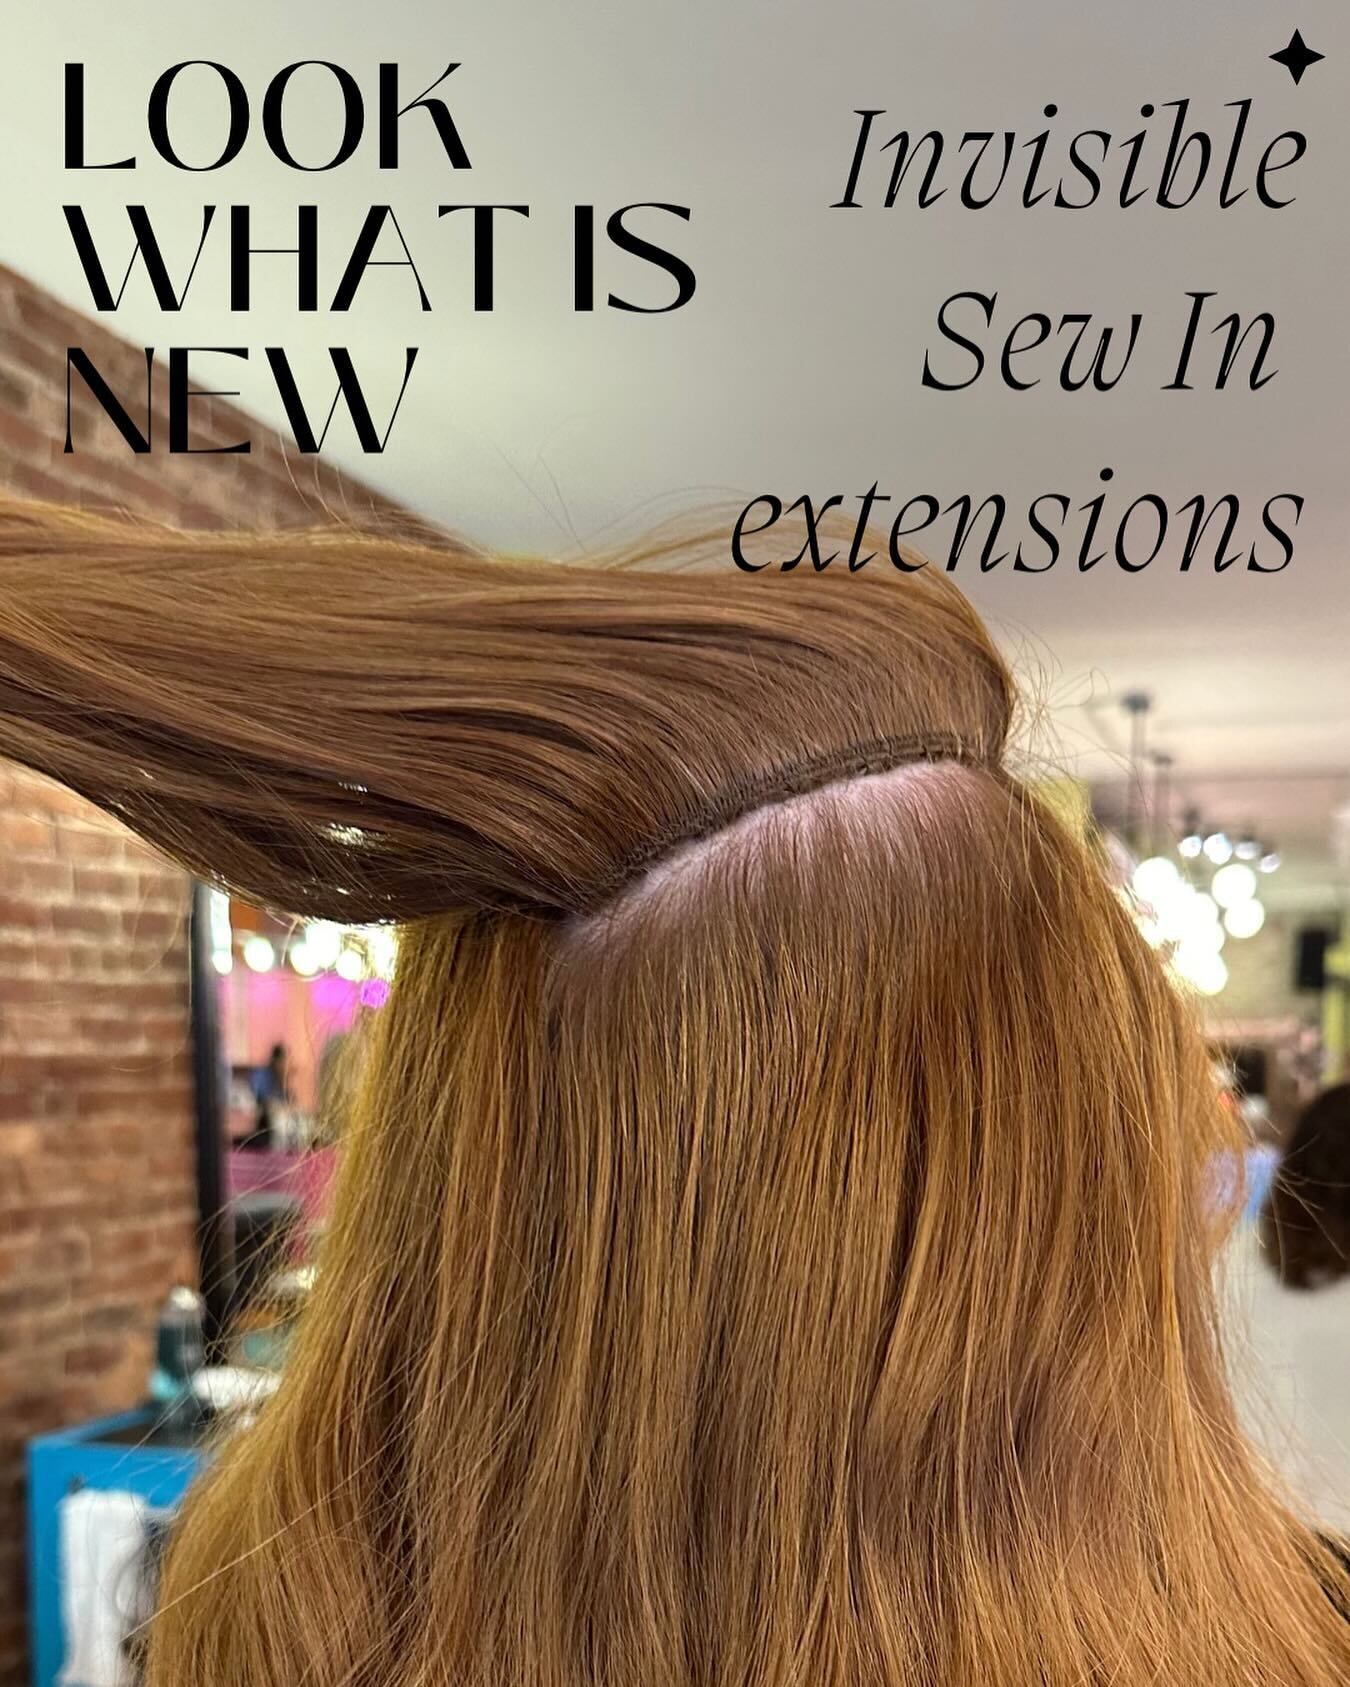 DM me if you want to find out if this method is a good fit for you 

I am starting to offer a new extension method called invisible sew ins

My personal favorite part about this method is all beads are hidden and every 3rd move up you get your hair t